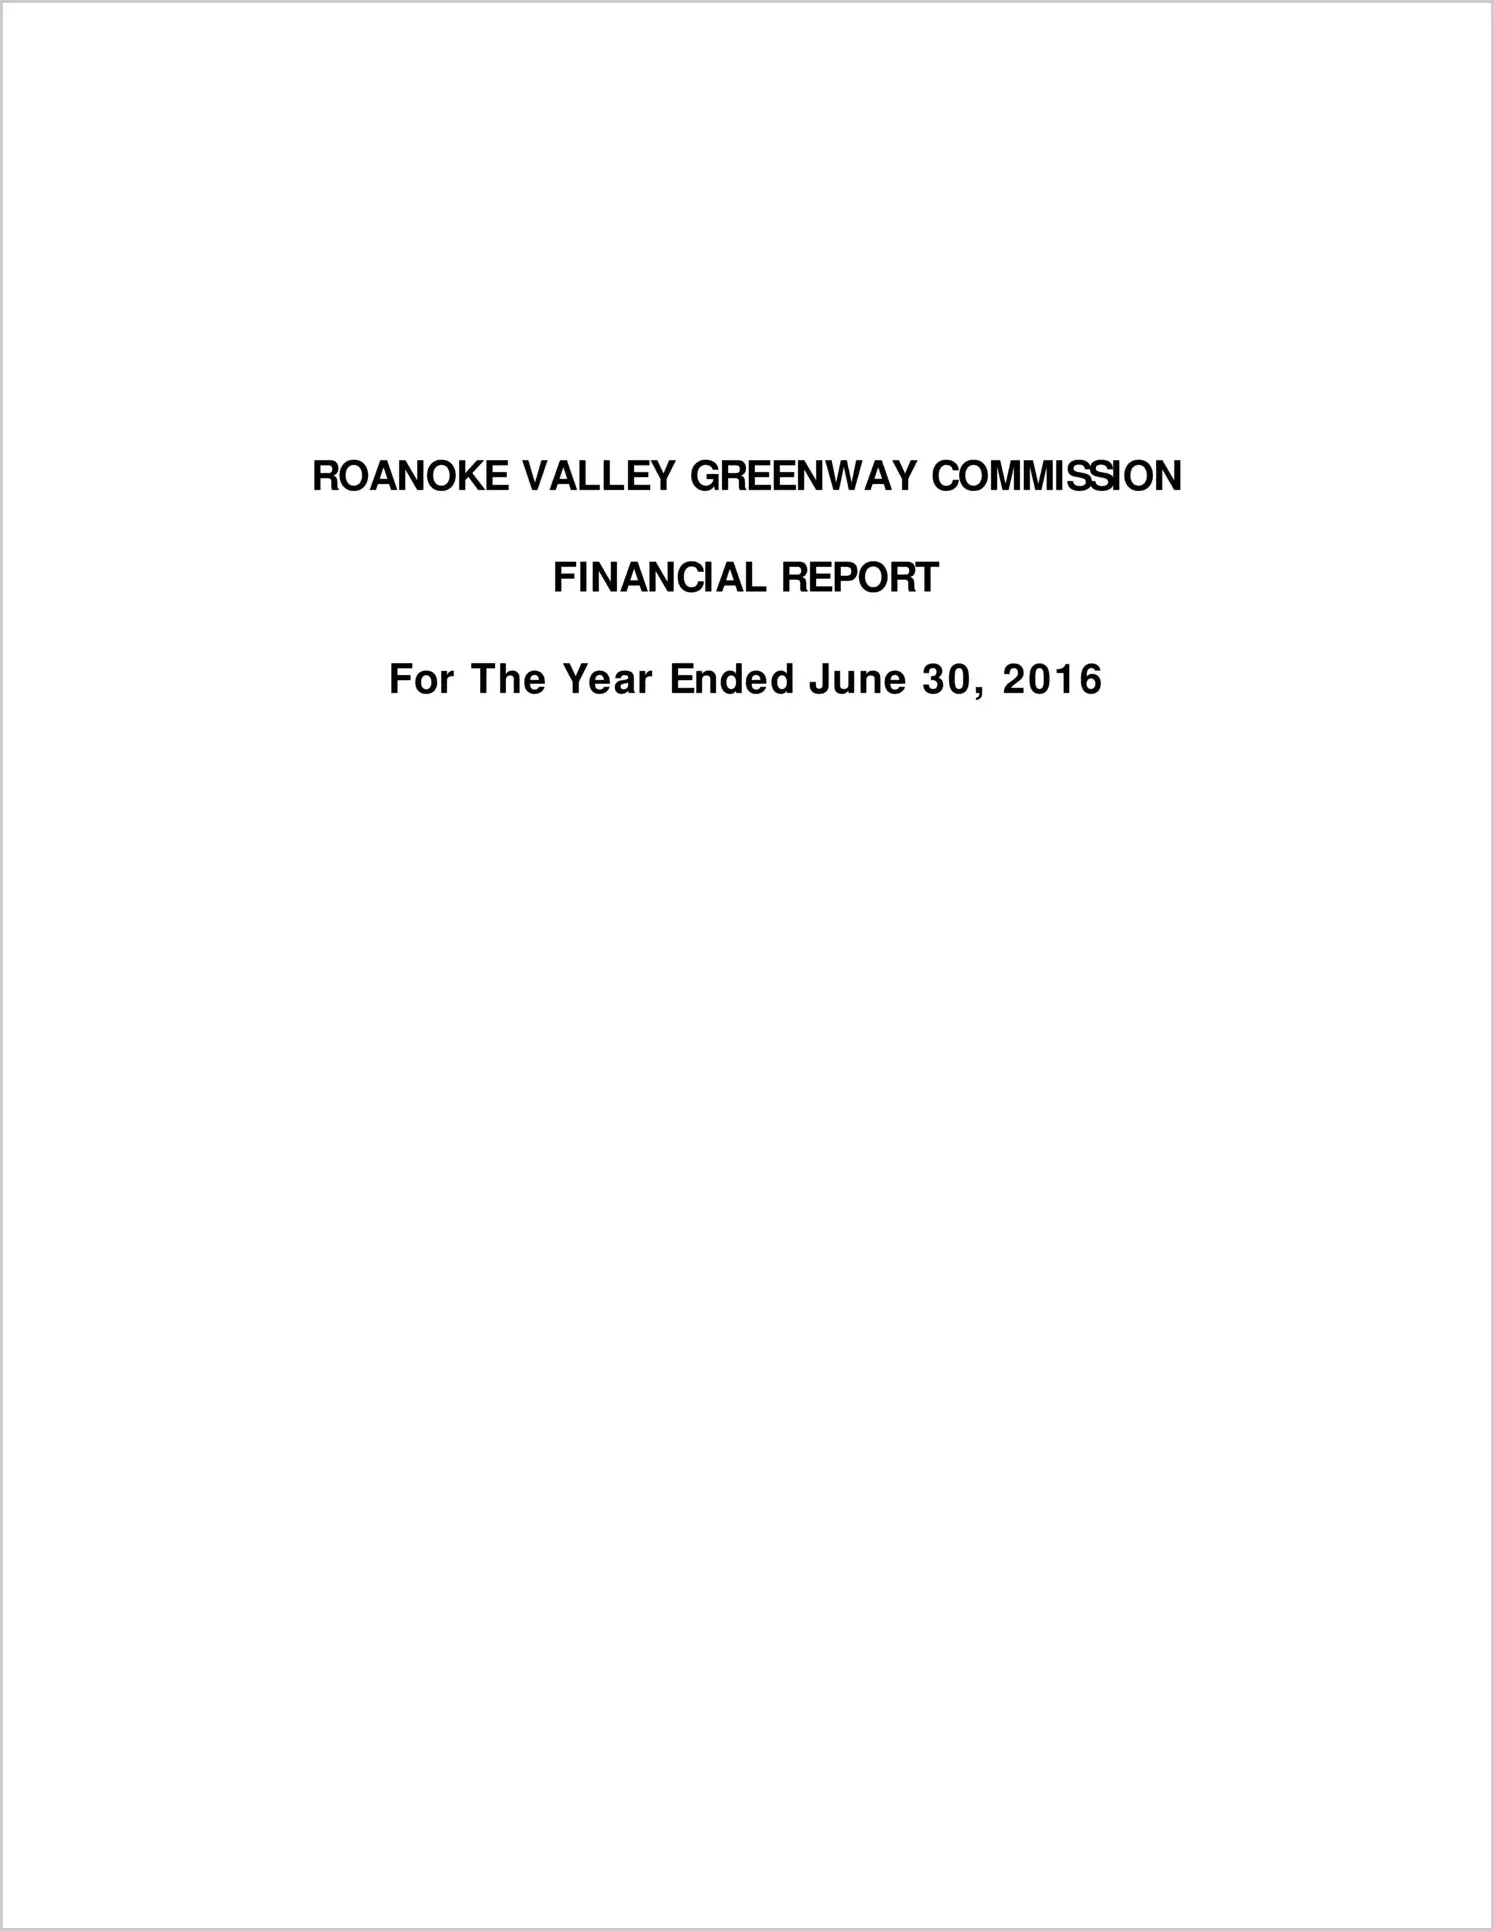 2016 ABC/Other Annual Financial Report  for Roanoke Valley Greenway Commission